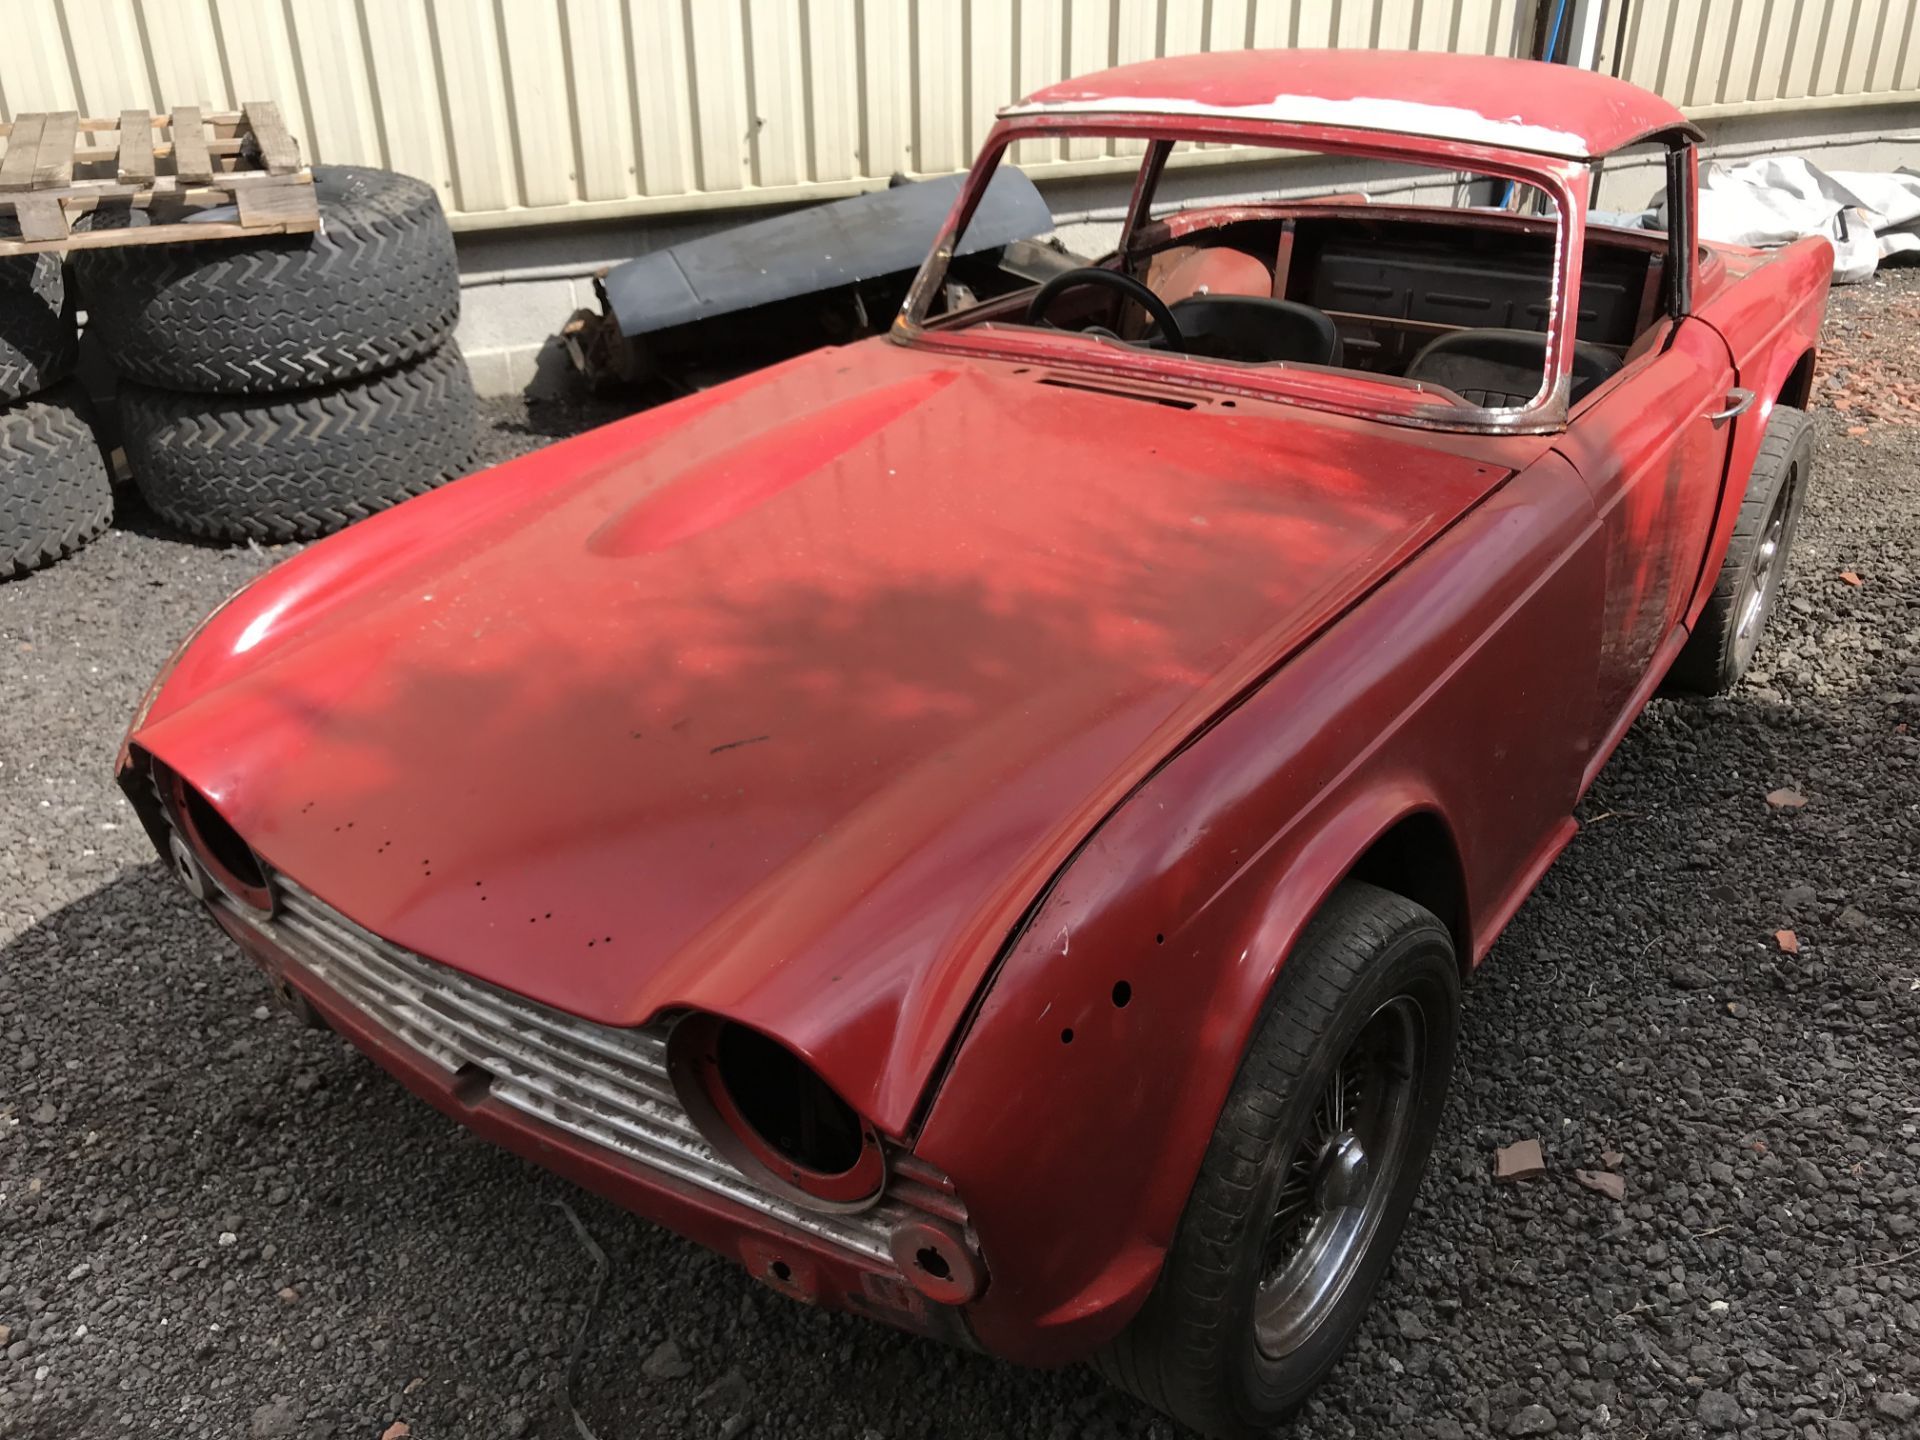 Triumph TR4 with Optional Hardtop - Image 58 of 64